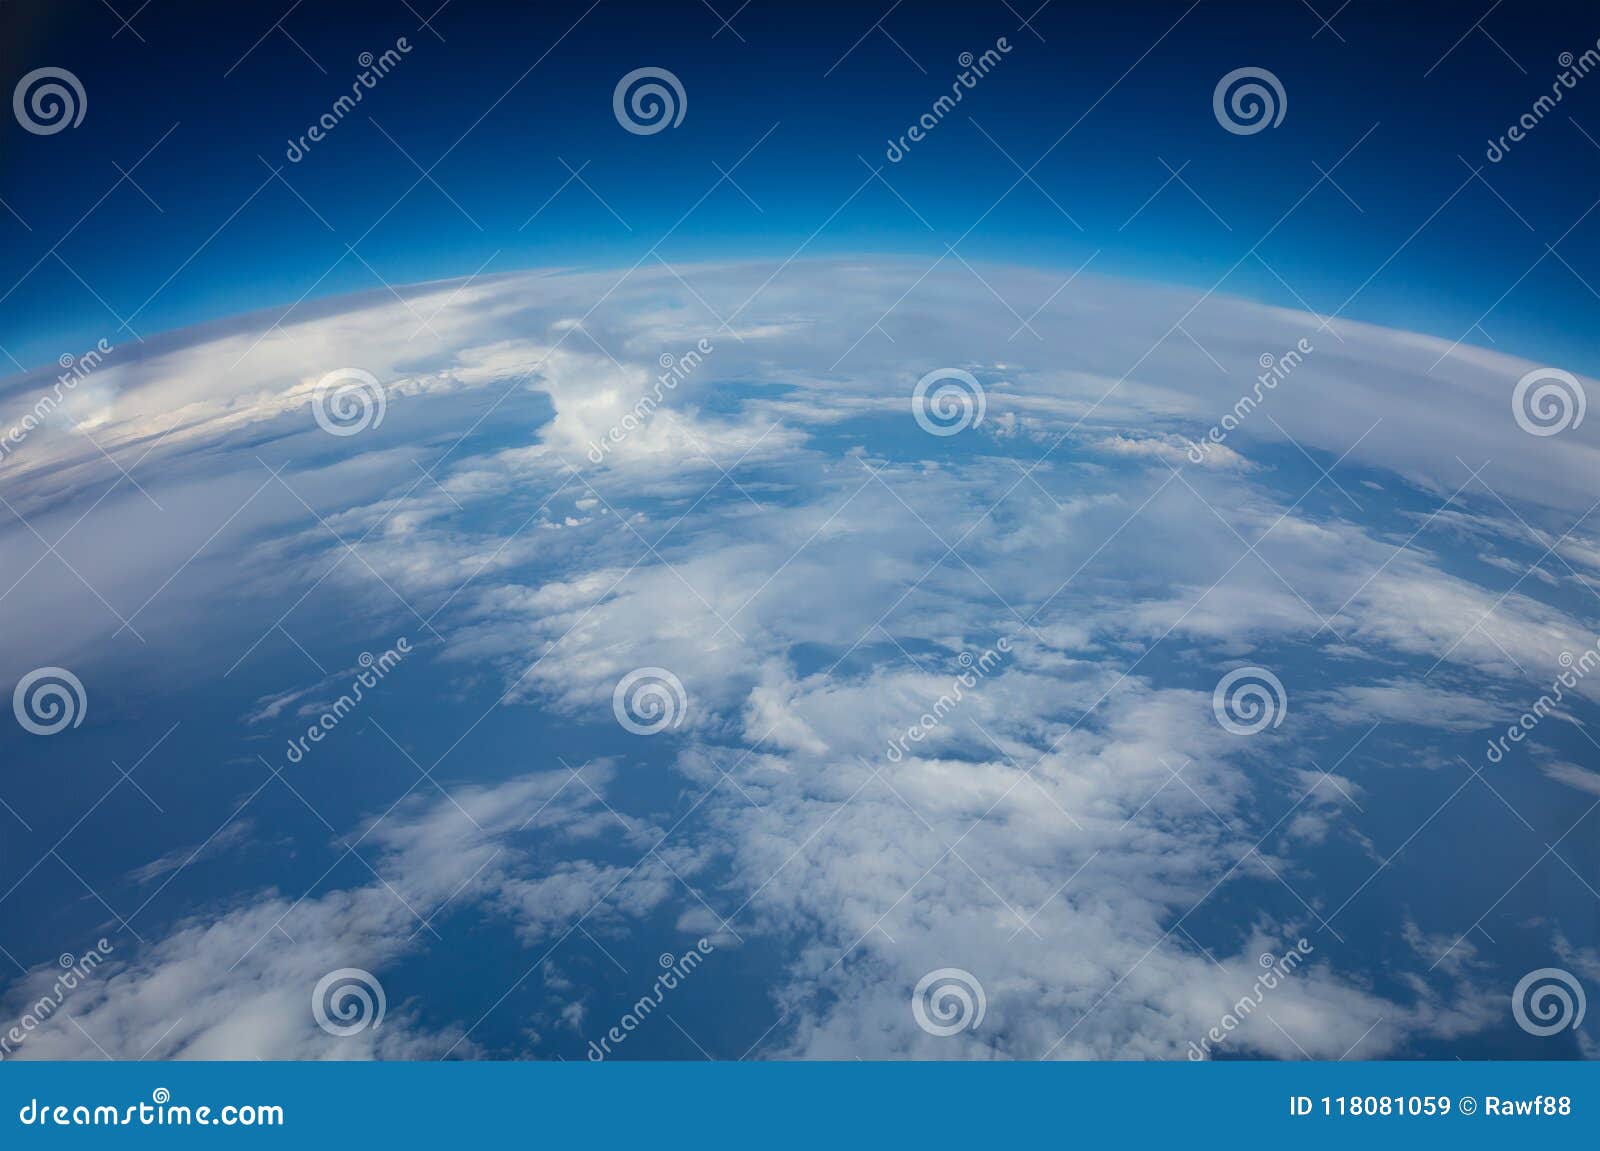 curvature of planet earth. aerial shot.